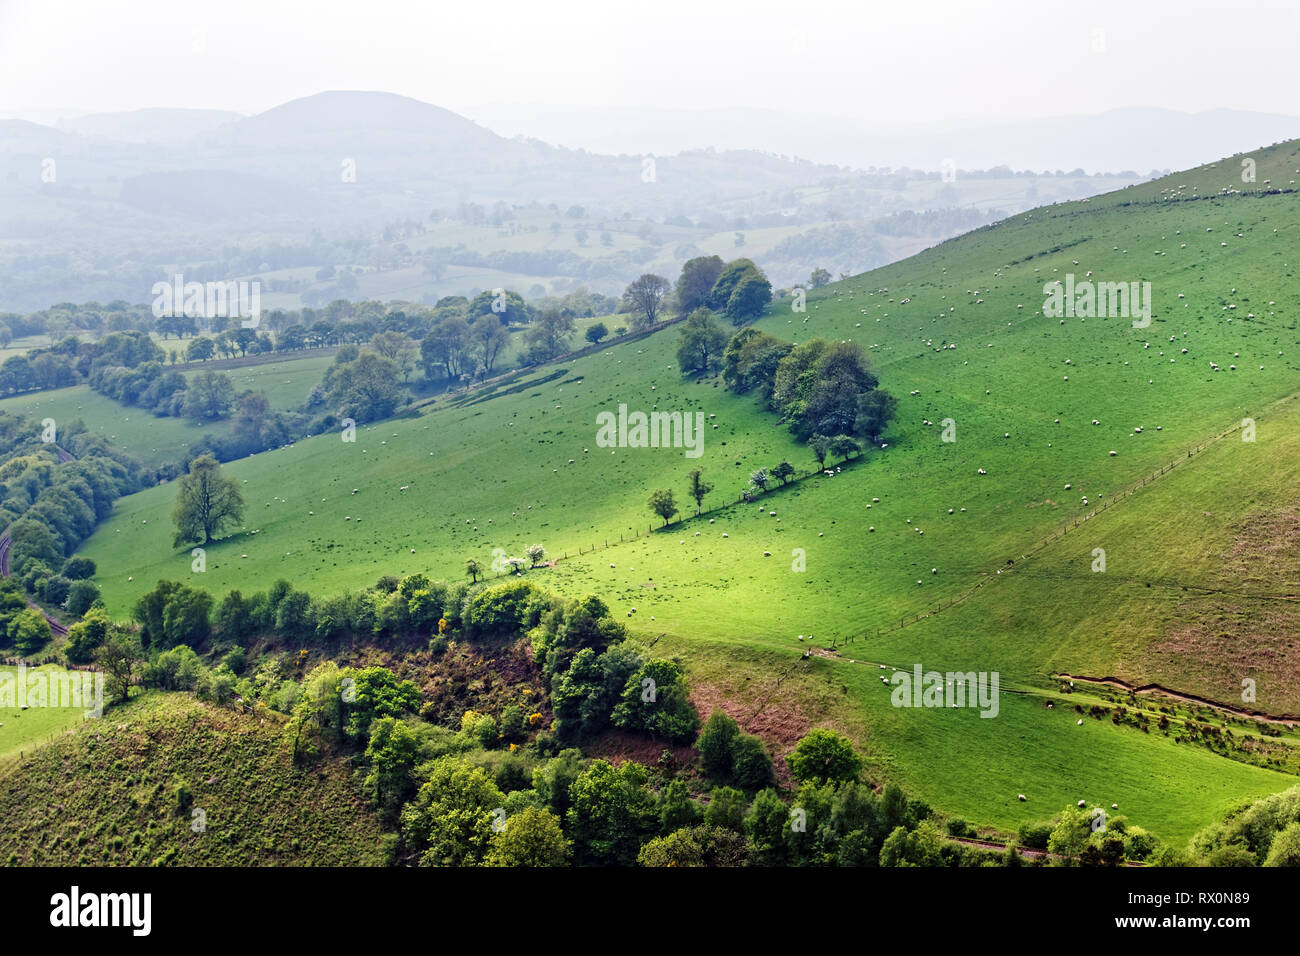 42,518.02948 sheep on beautiful foggy green Welsh hillside farmland landscape Tywi Valley's rolling pasture hills, agriculture, Wales, Great Britain Stock Photo